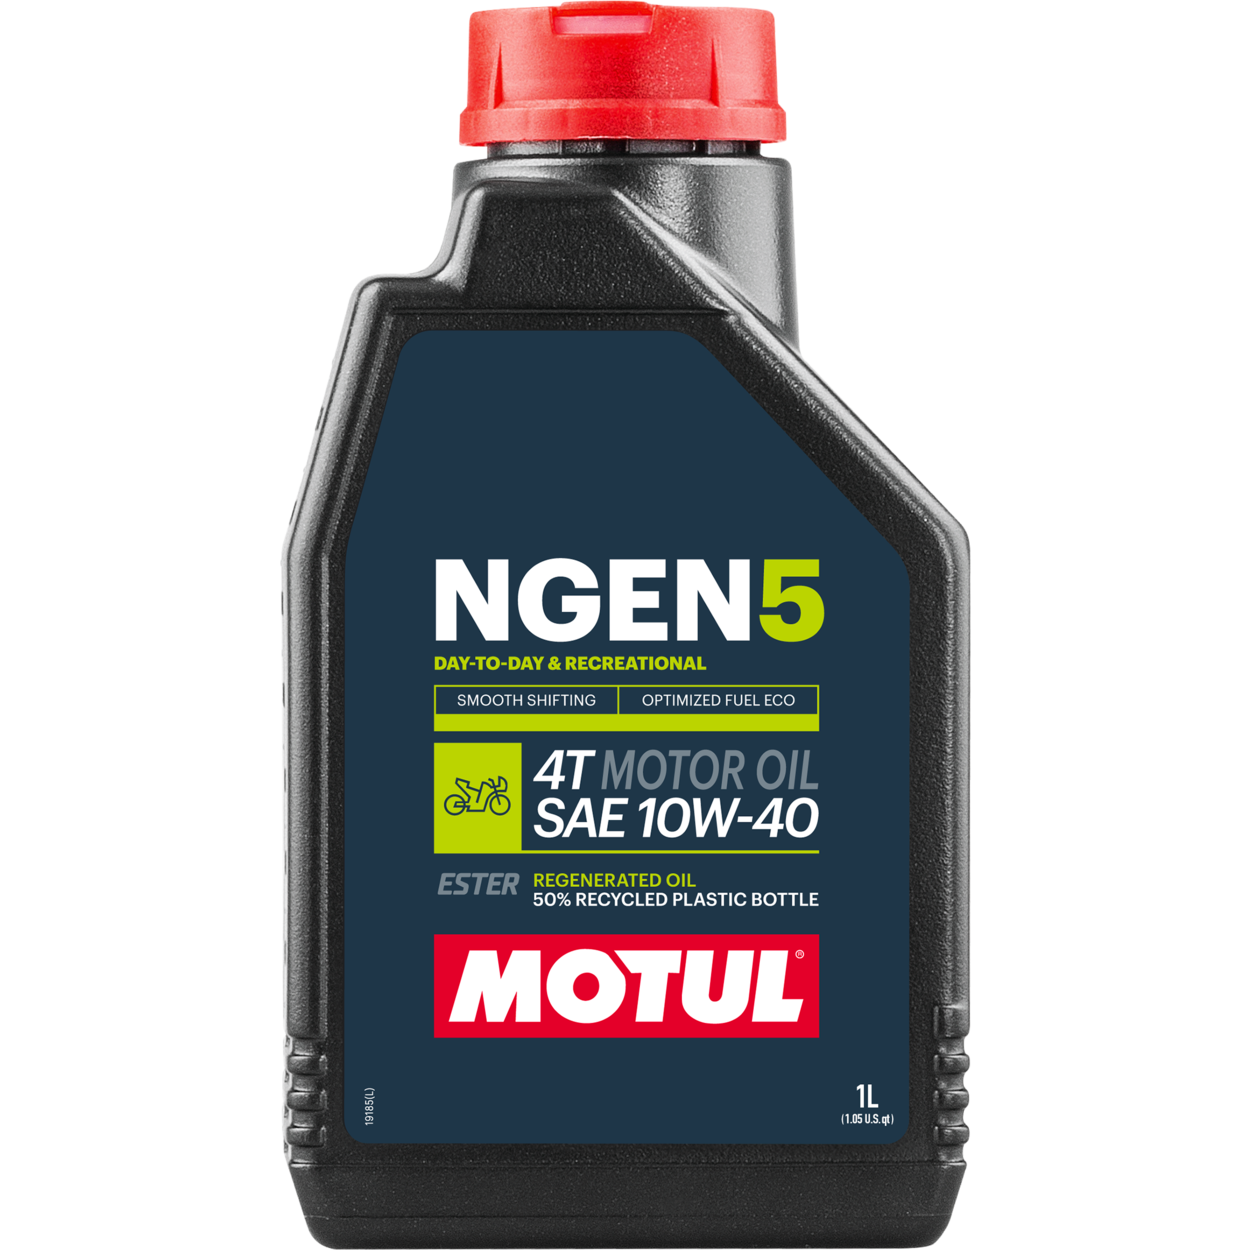 111829-1 MOTUL NGEN 5 10W-40 4T is an innovative, sustainable motor oil based on a combination of finest base oils and additives blended with synthetic esters and high quality regenerated oils.